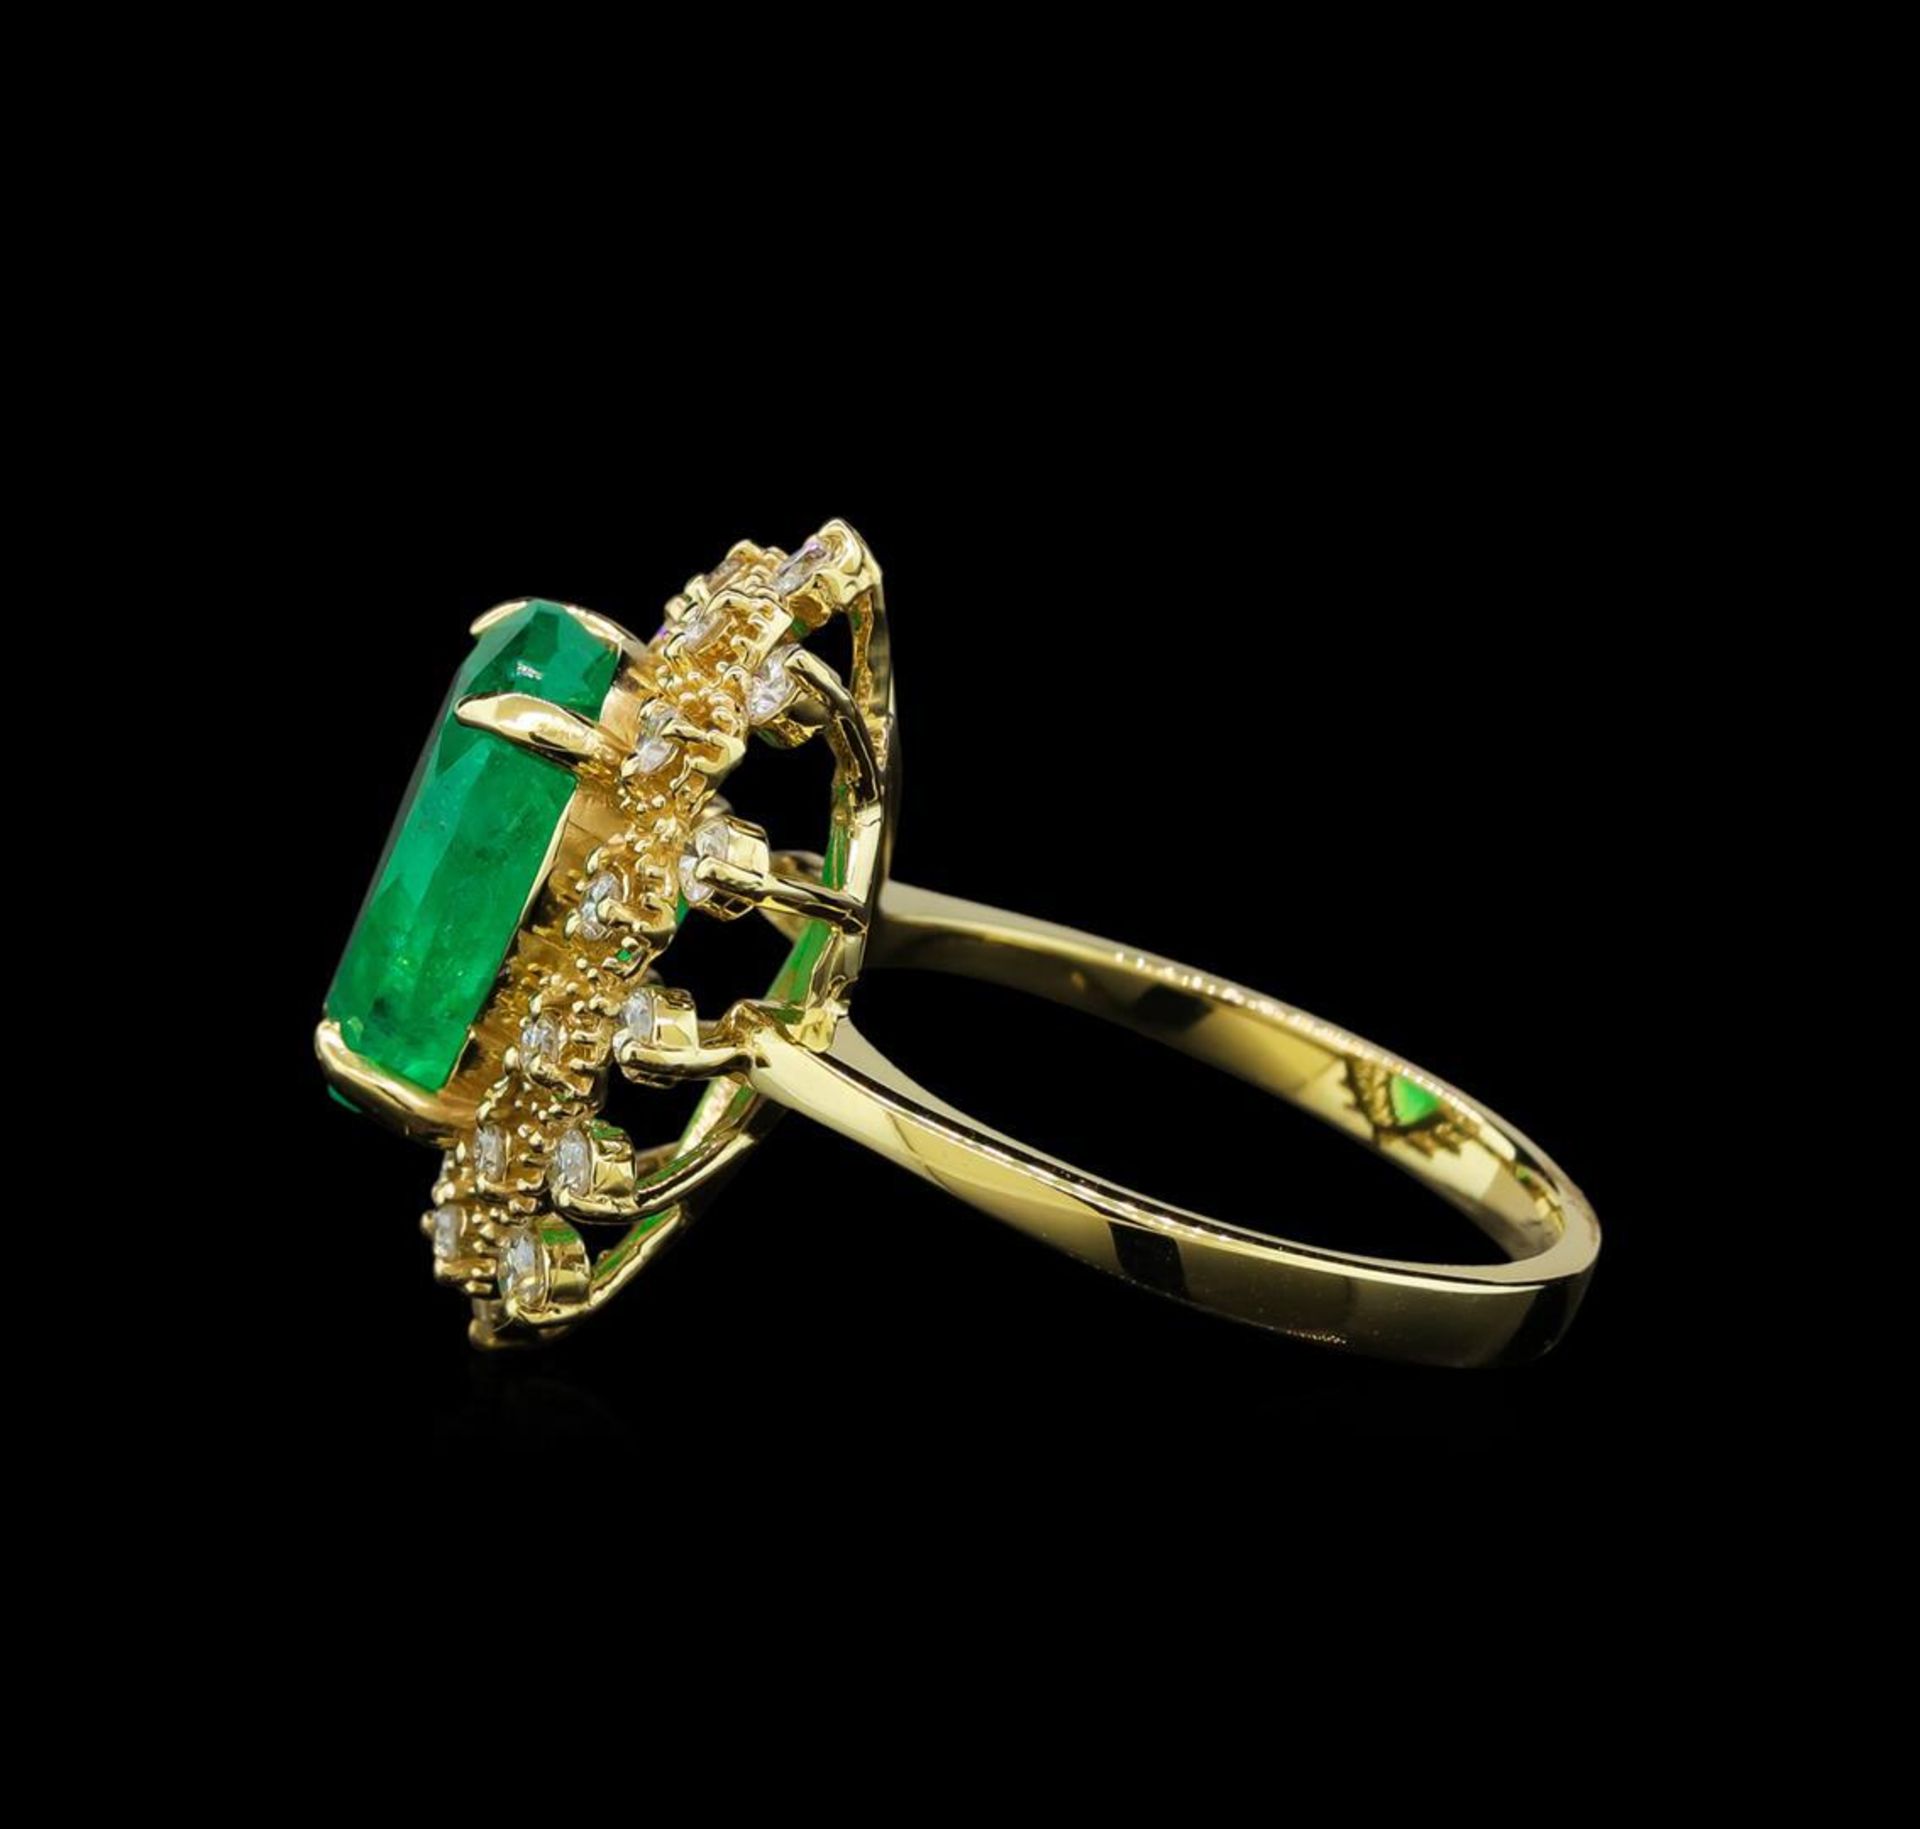 3.65 ctw Emerald and Diamond Ring - 14KT Yellow Gold - Image 3 of 5